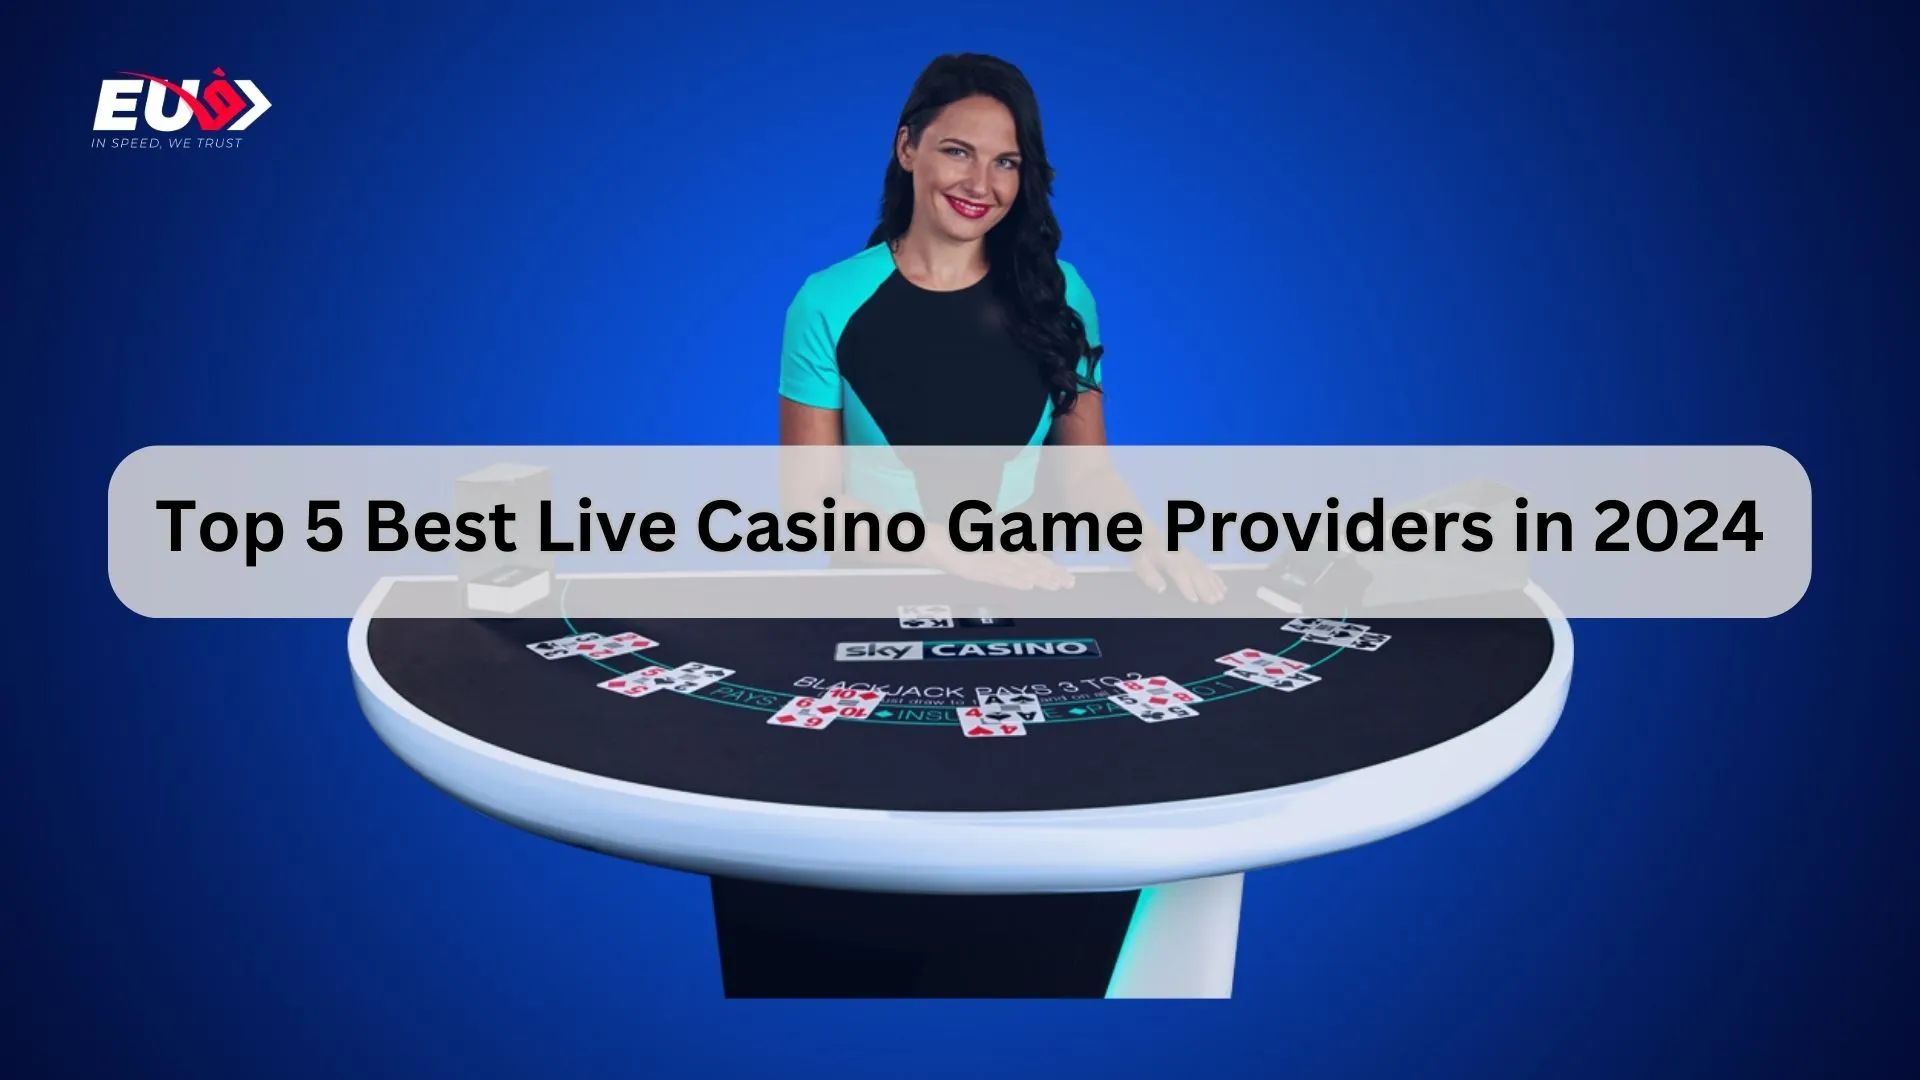 Top 5 Best Live Casino Game Providers 2024